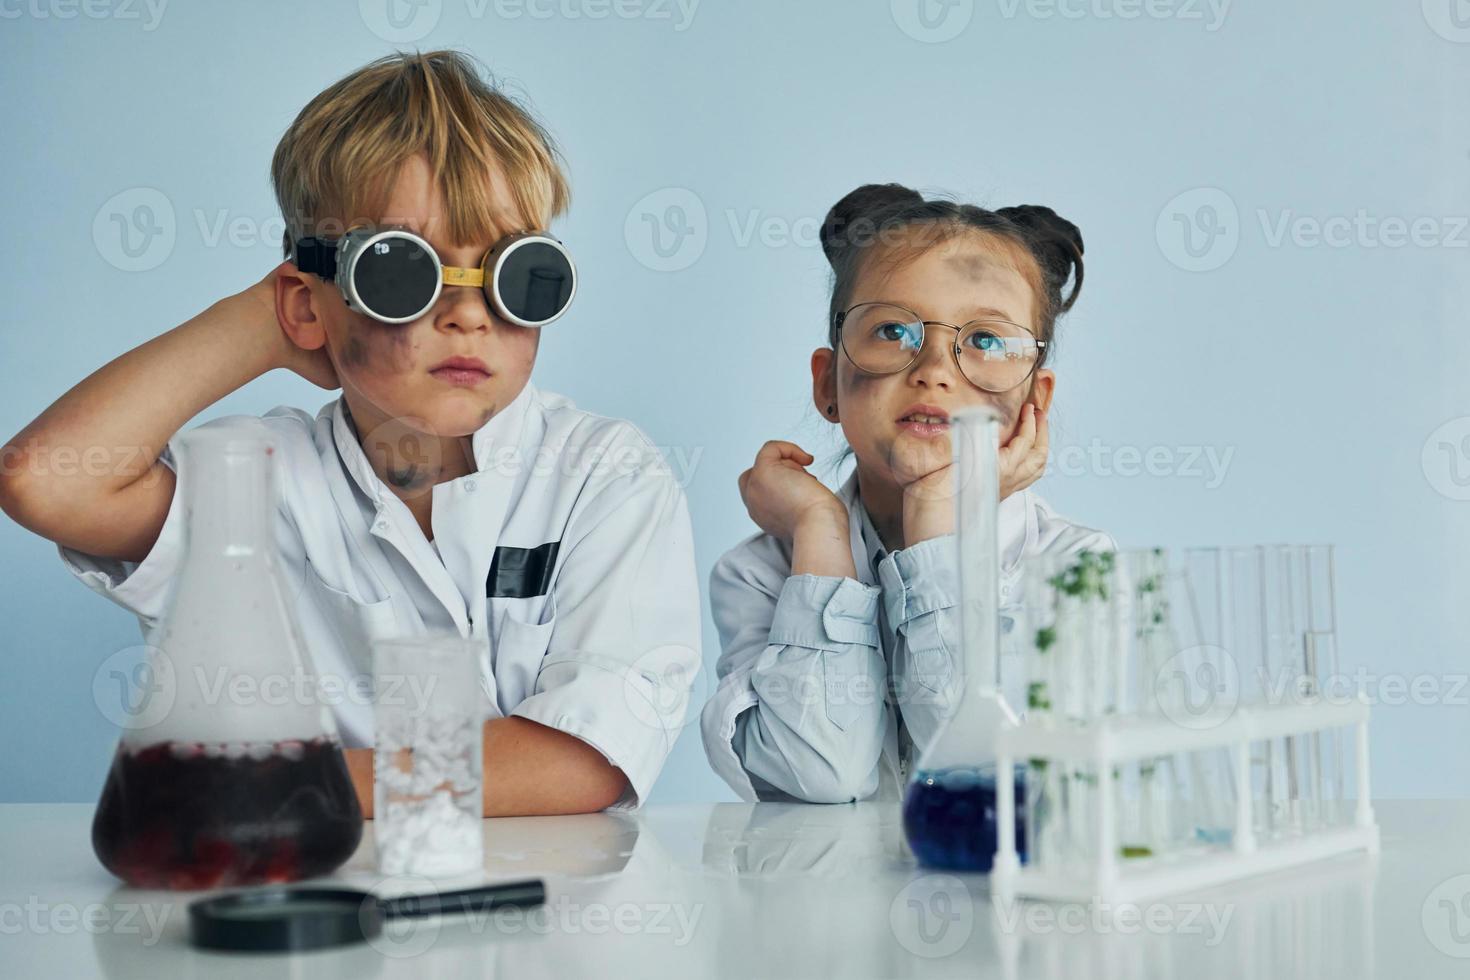 Girl with boy working together. Children in white coats plays a scientists in lab by using equipment photo